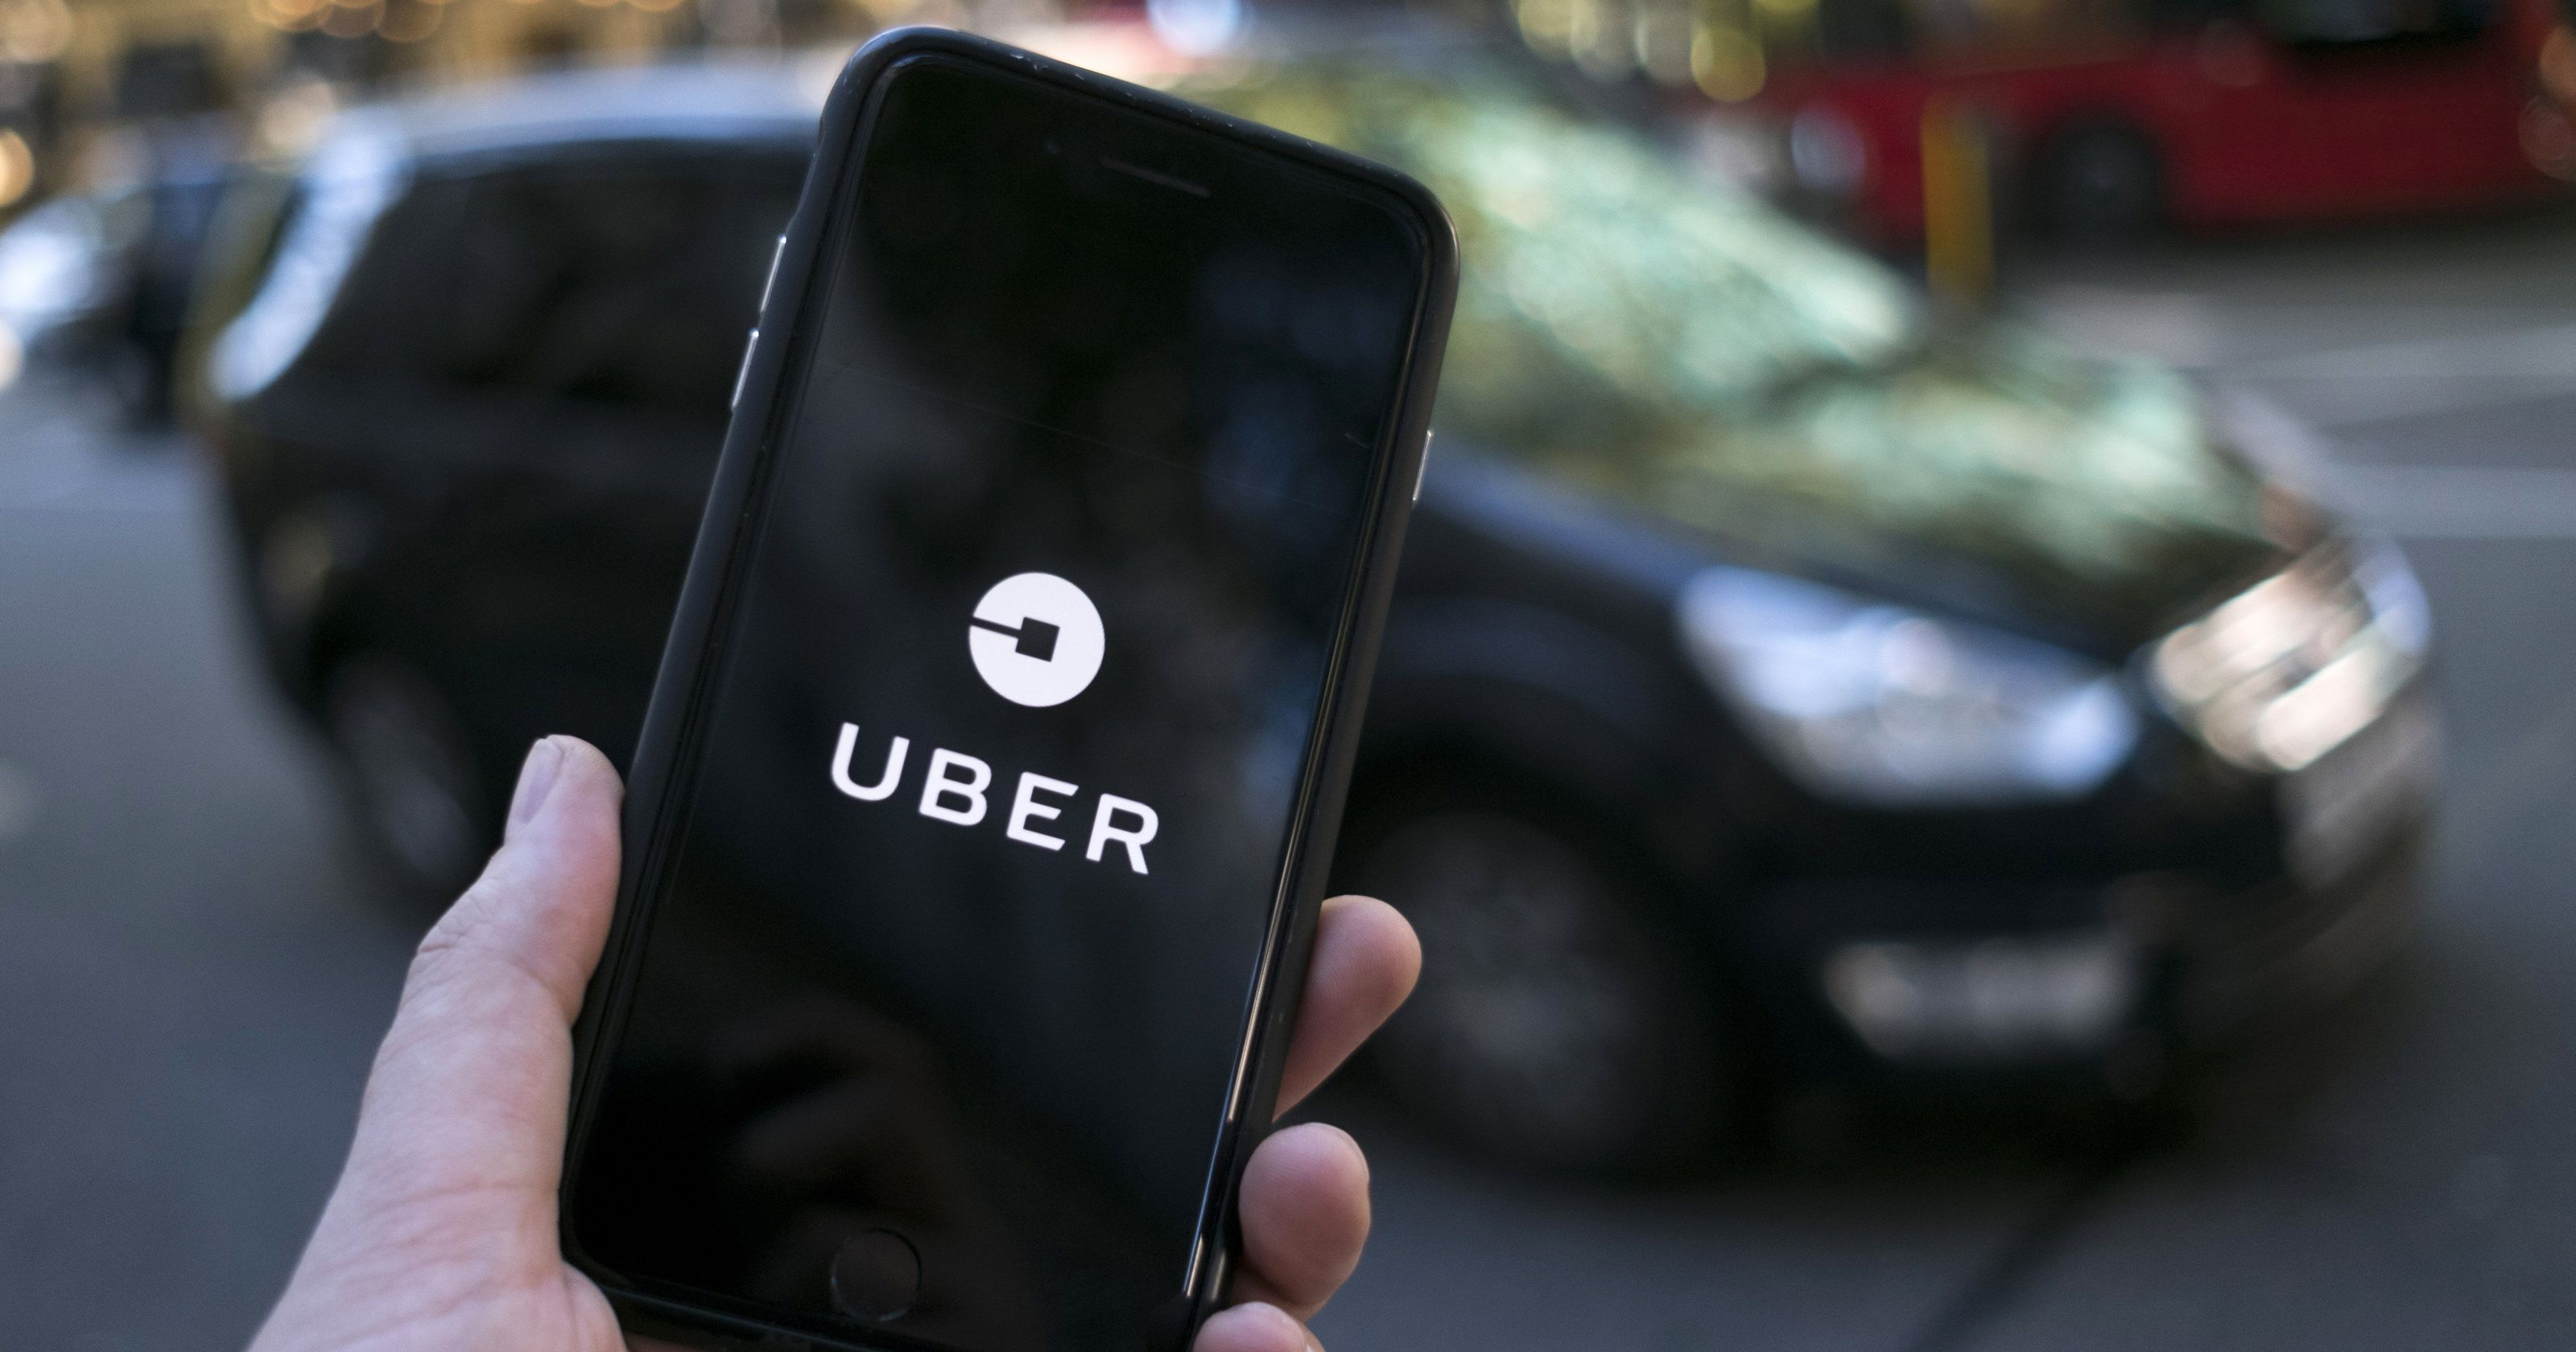 Uber launches Helpline Number for Indian Users